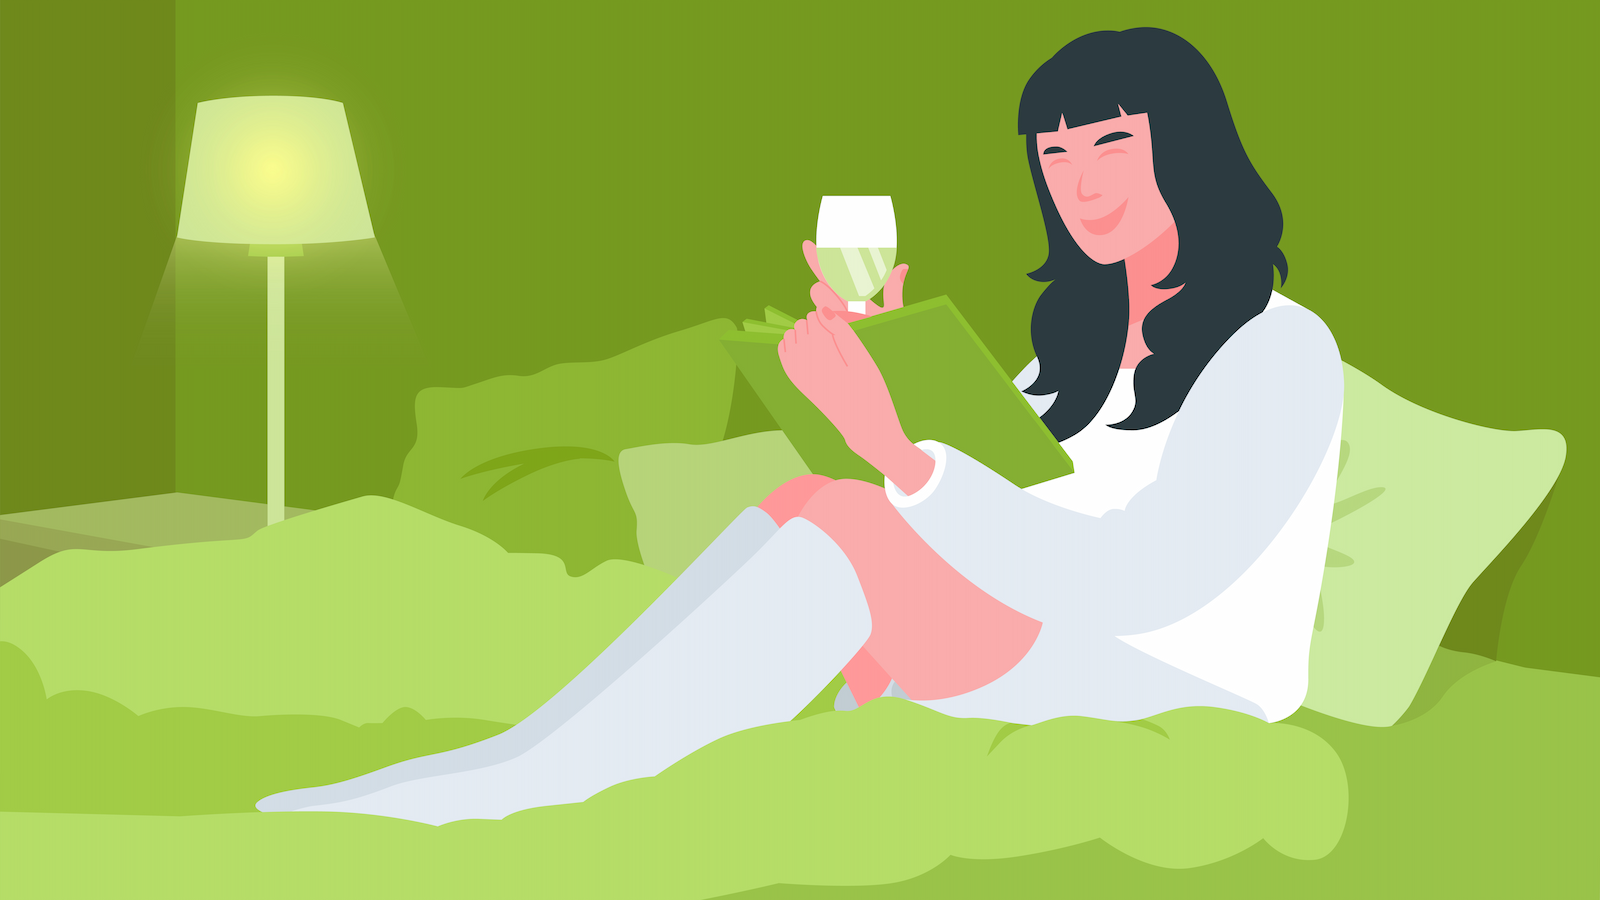 Illustration of person relaxing in bed with a book and beverage